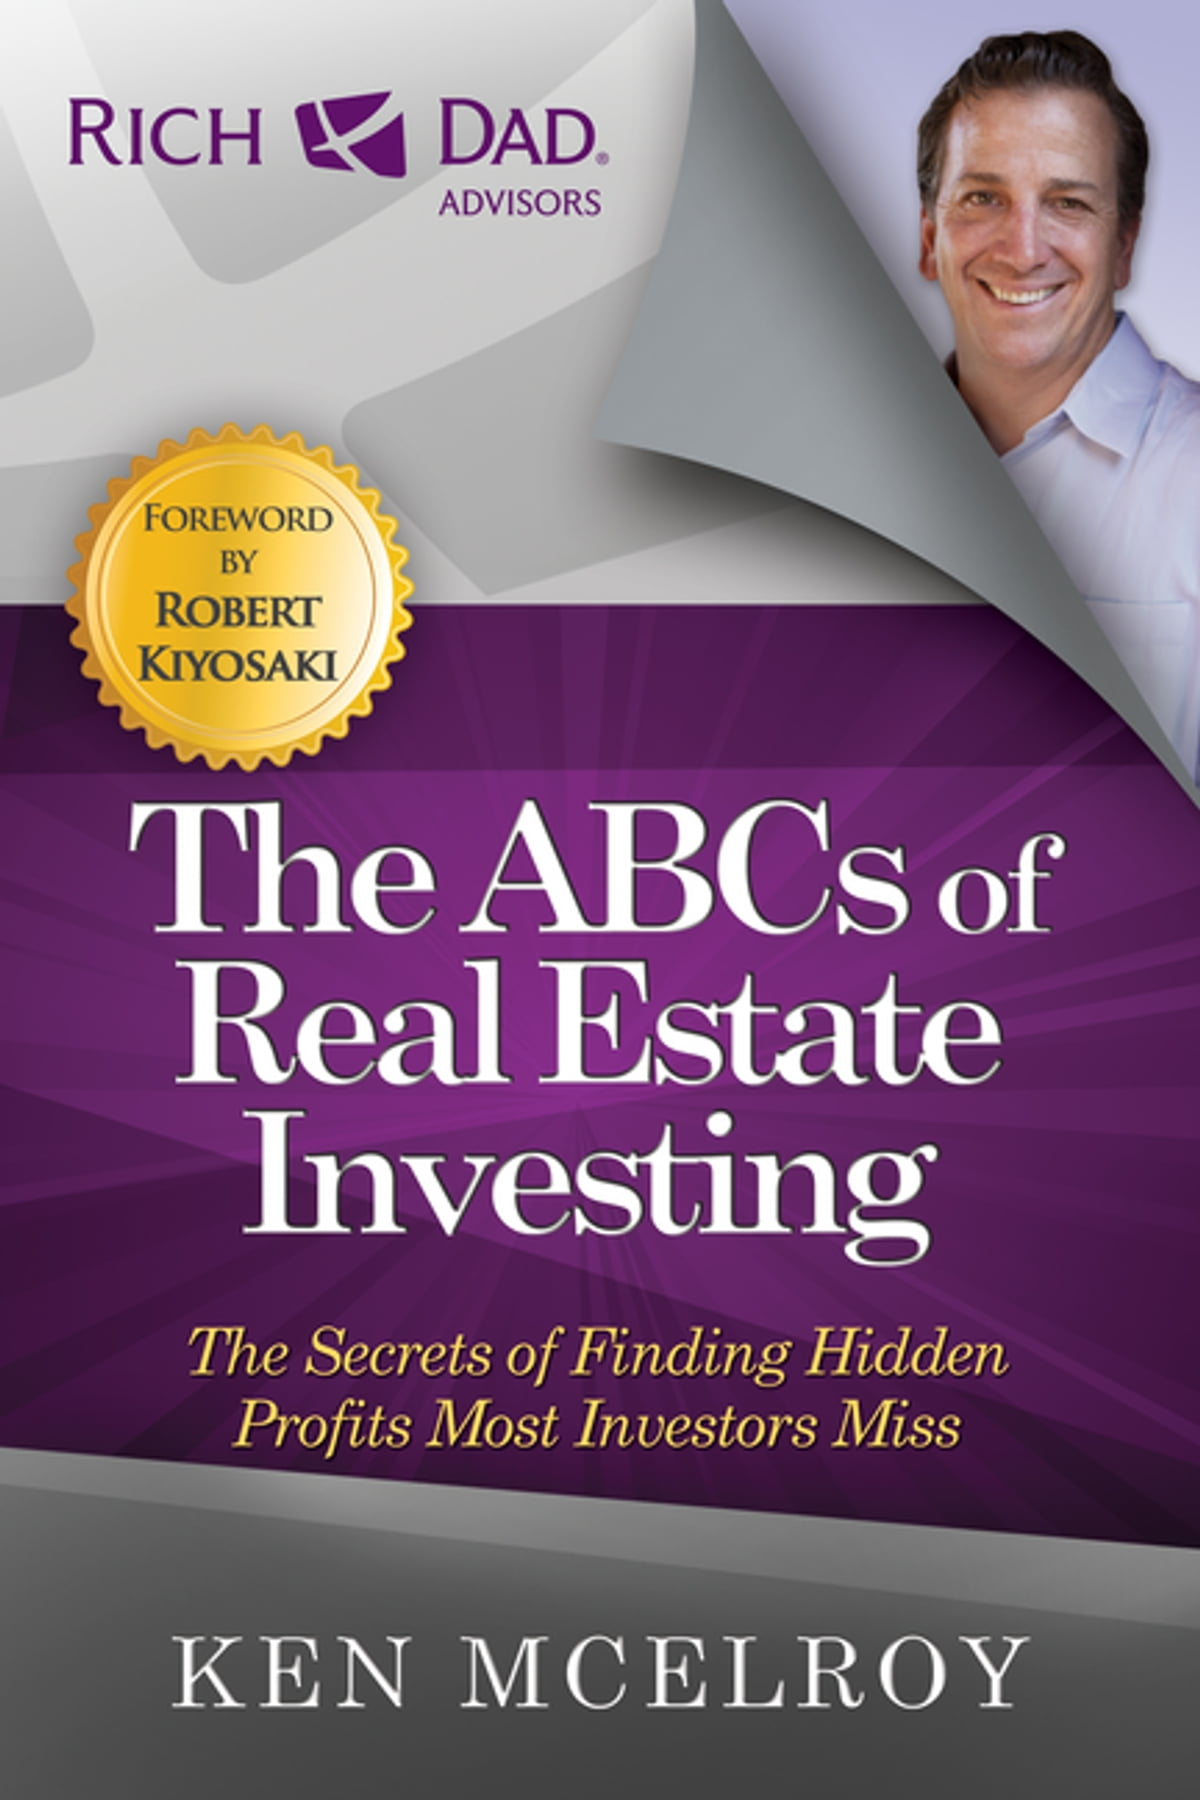 The ABCs of Real Estate Investing | Photo from Kobo.com Website